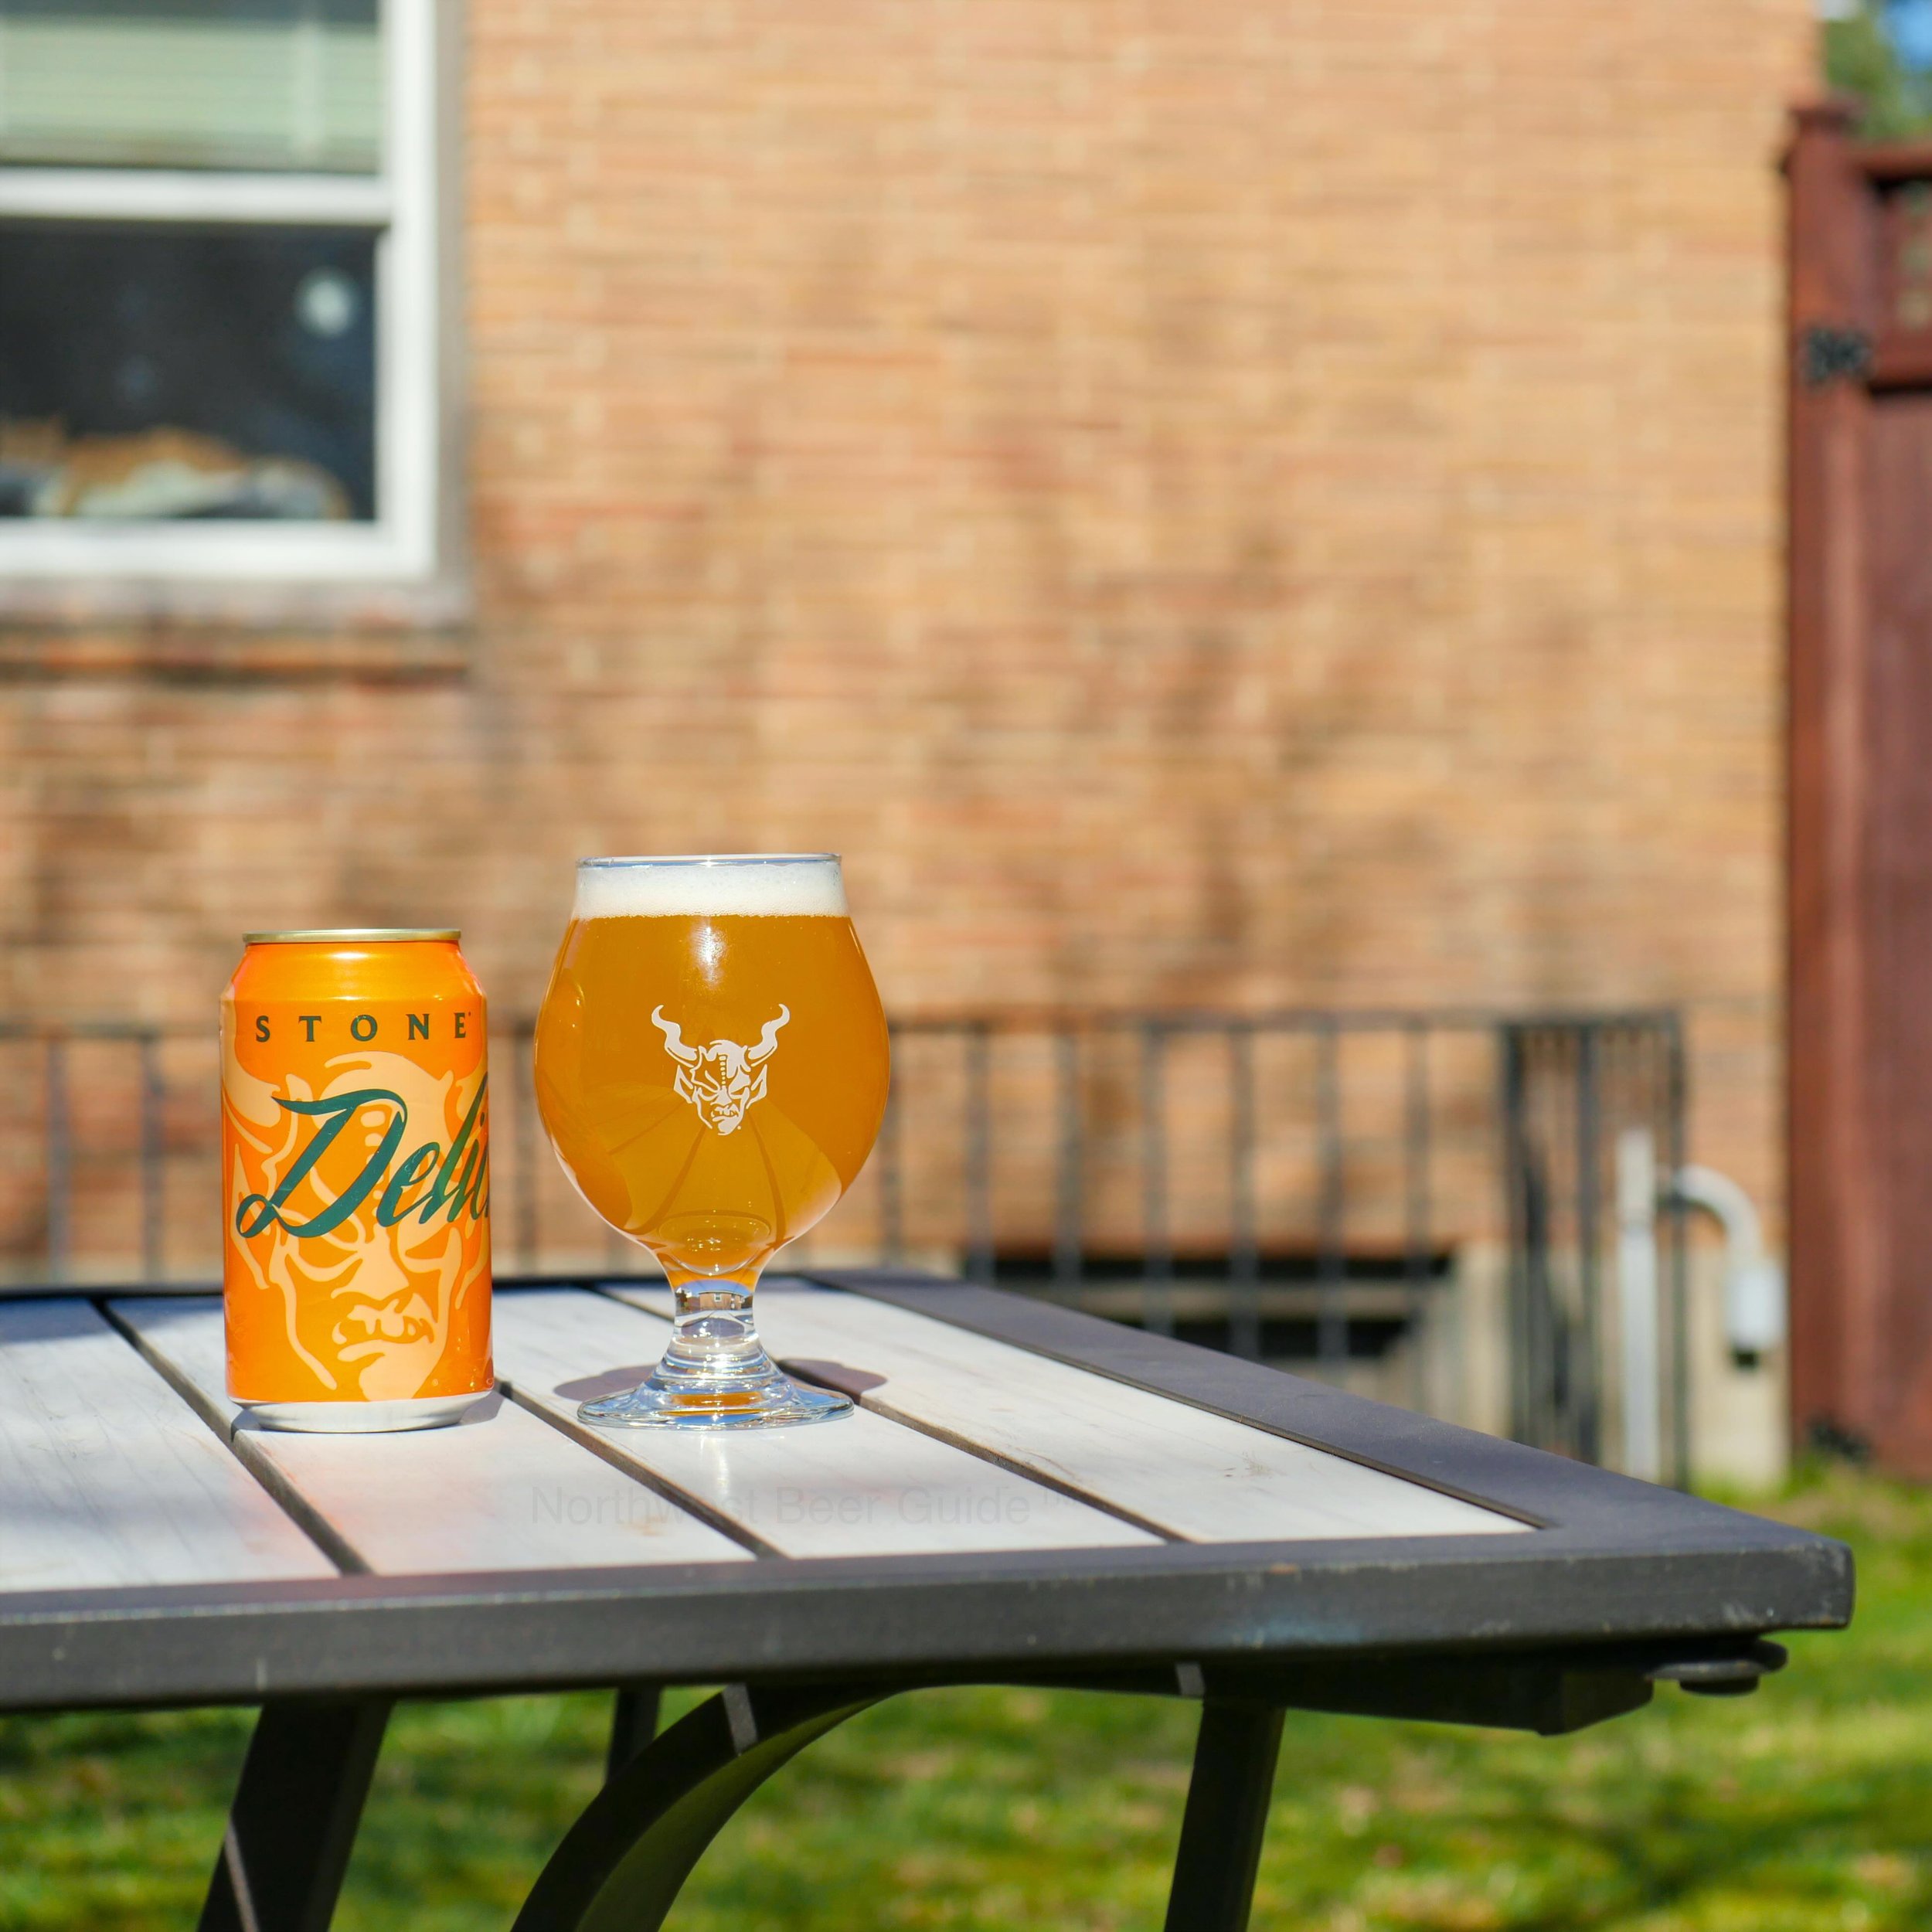 With notes of dank cannabis, grapefruit zest, pine needles, stone fruit, tropical pineapple, and maybe some spruce tips (?), @stonebrewing&rsquo;s Delicious Hazy IPA hits the spot on a Spring day. Overall, this is a dish that pairs well with tacos, f